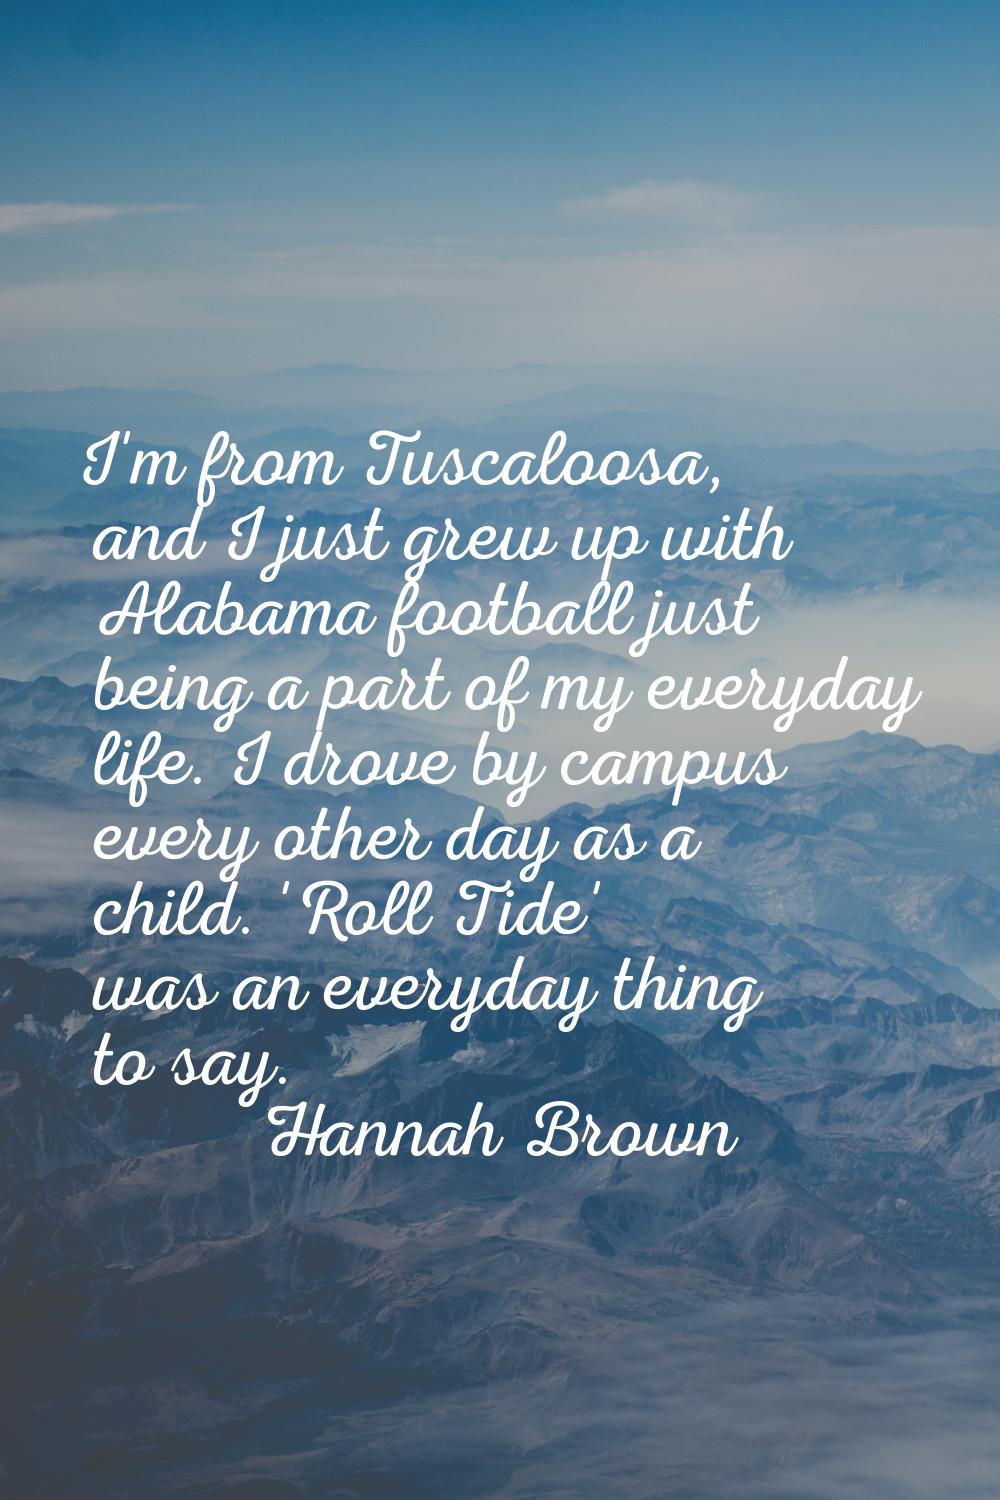 I'm from Tuscaloosa, and I just grew up with Alabama football just being a part of my everyday life